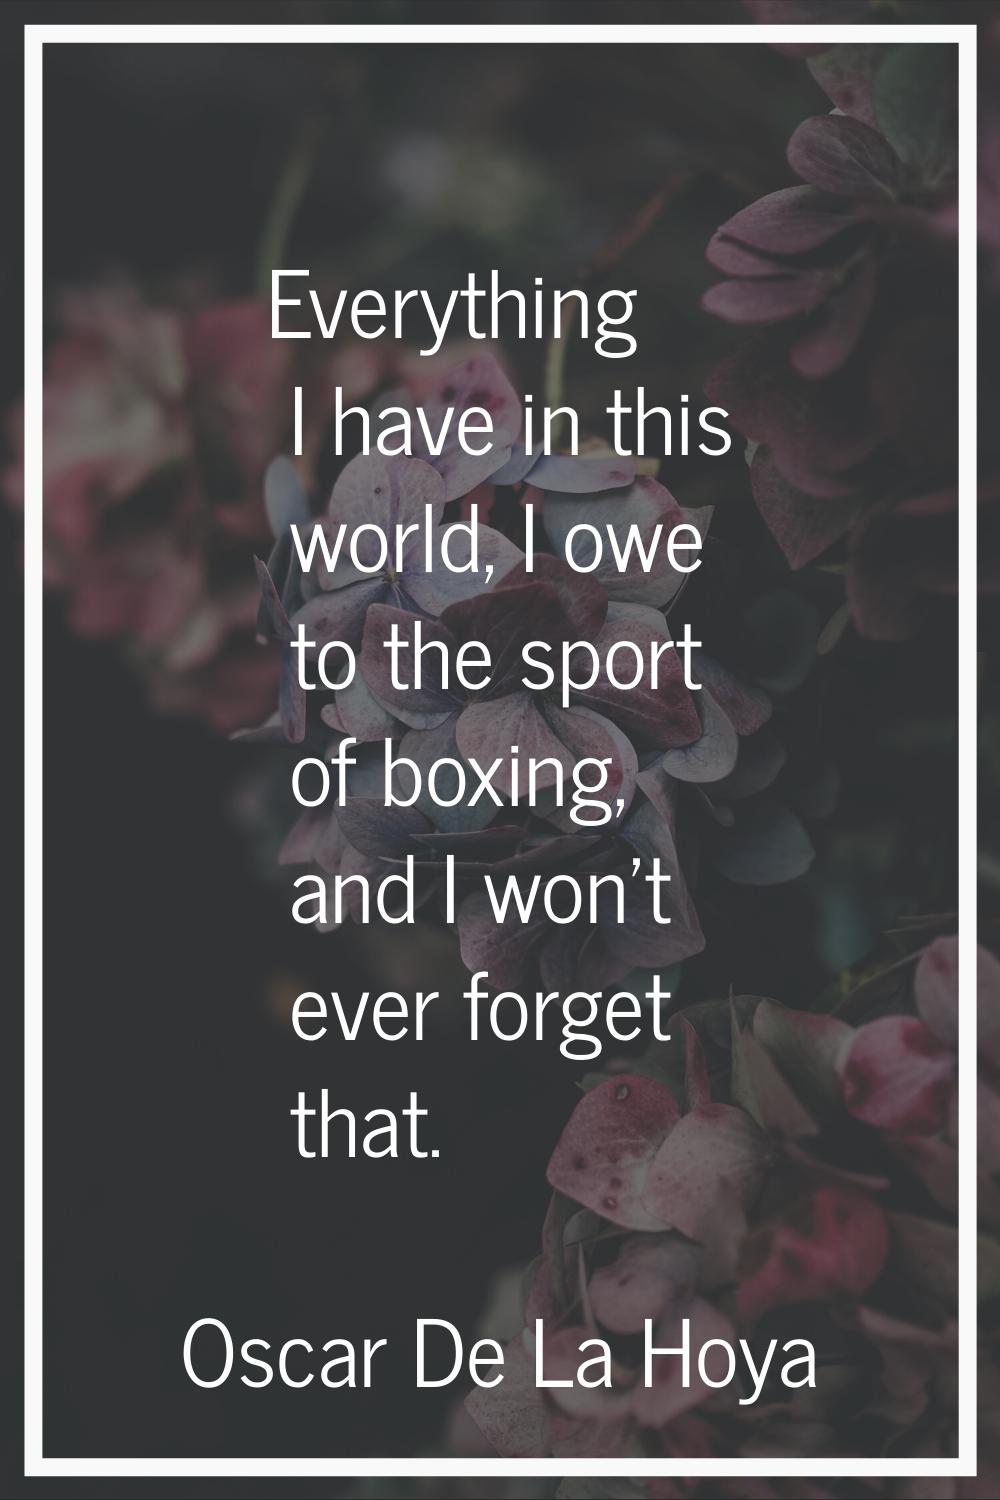 Everything I have in this world, I owe to the sport of boxing, and I won't ever forget that.